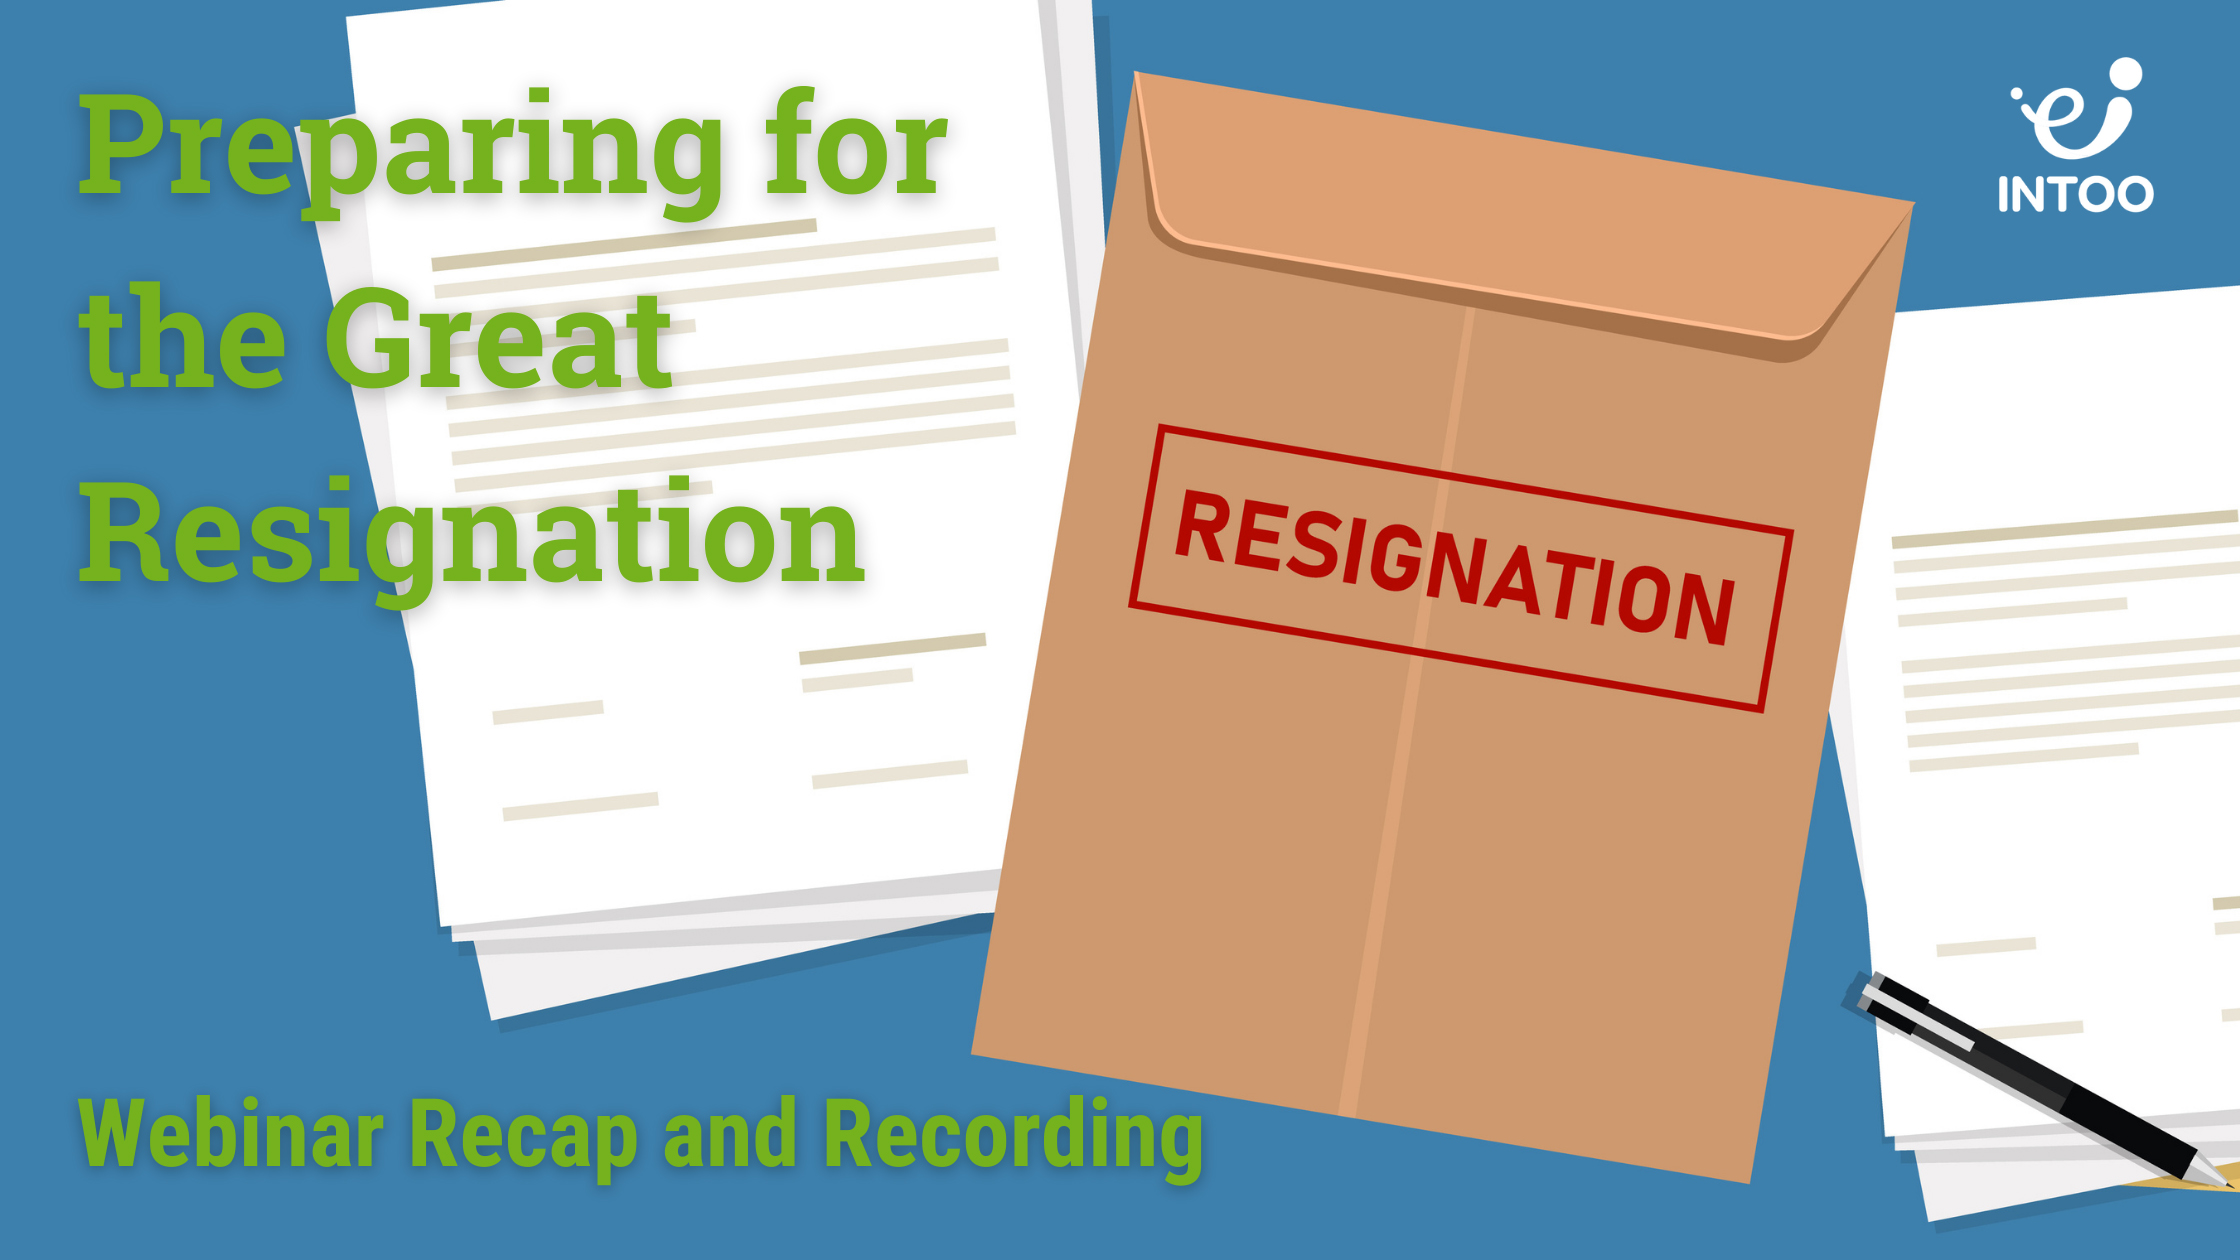 Resignation paperwork with the title, "Preparing for the Great Resignation - Webinar Recap and Recording"